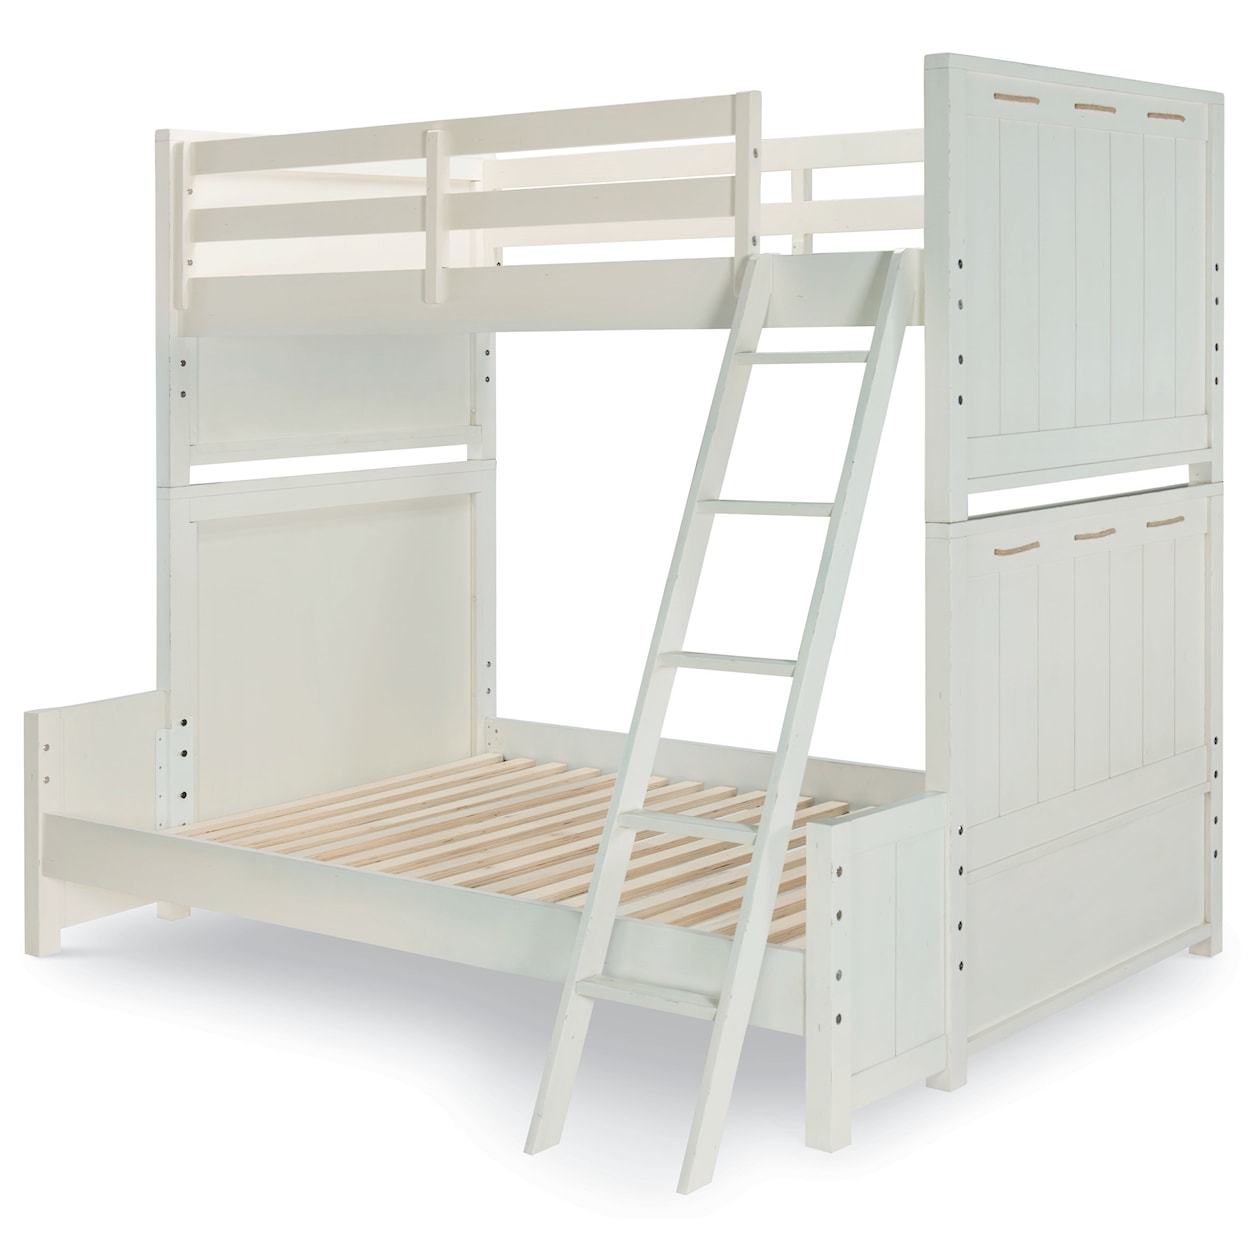 Legacy Classic Kids Lake House Twin over Full Bunk Bed